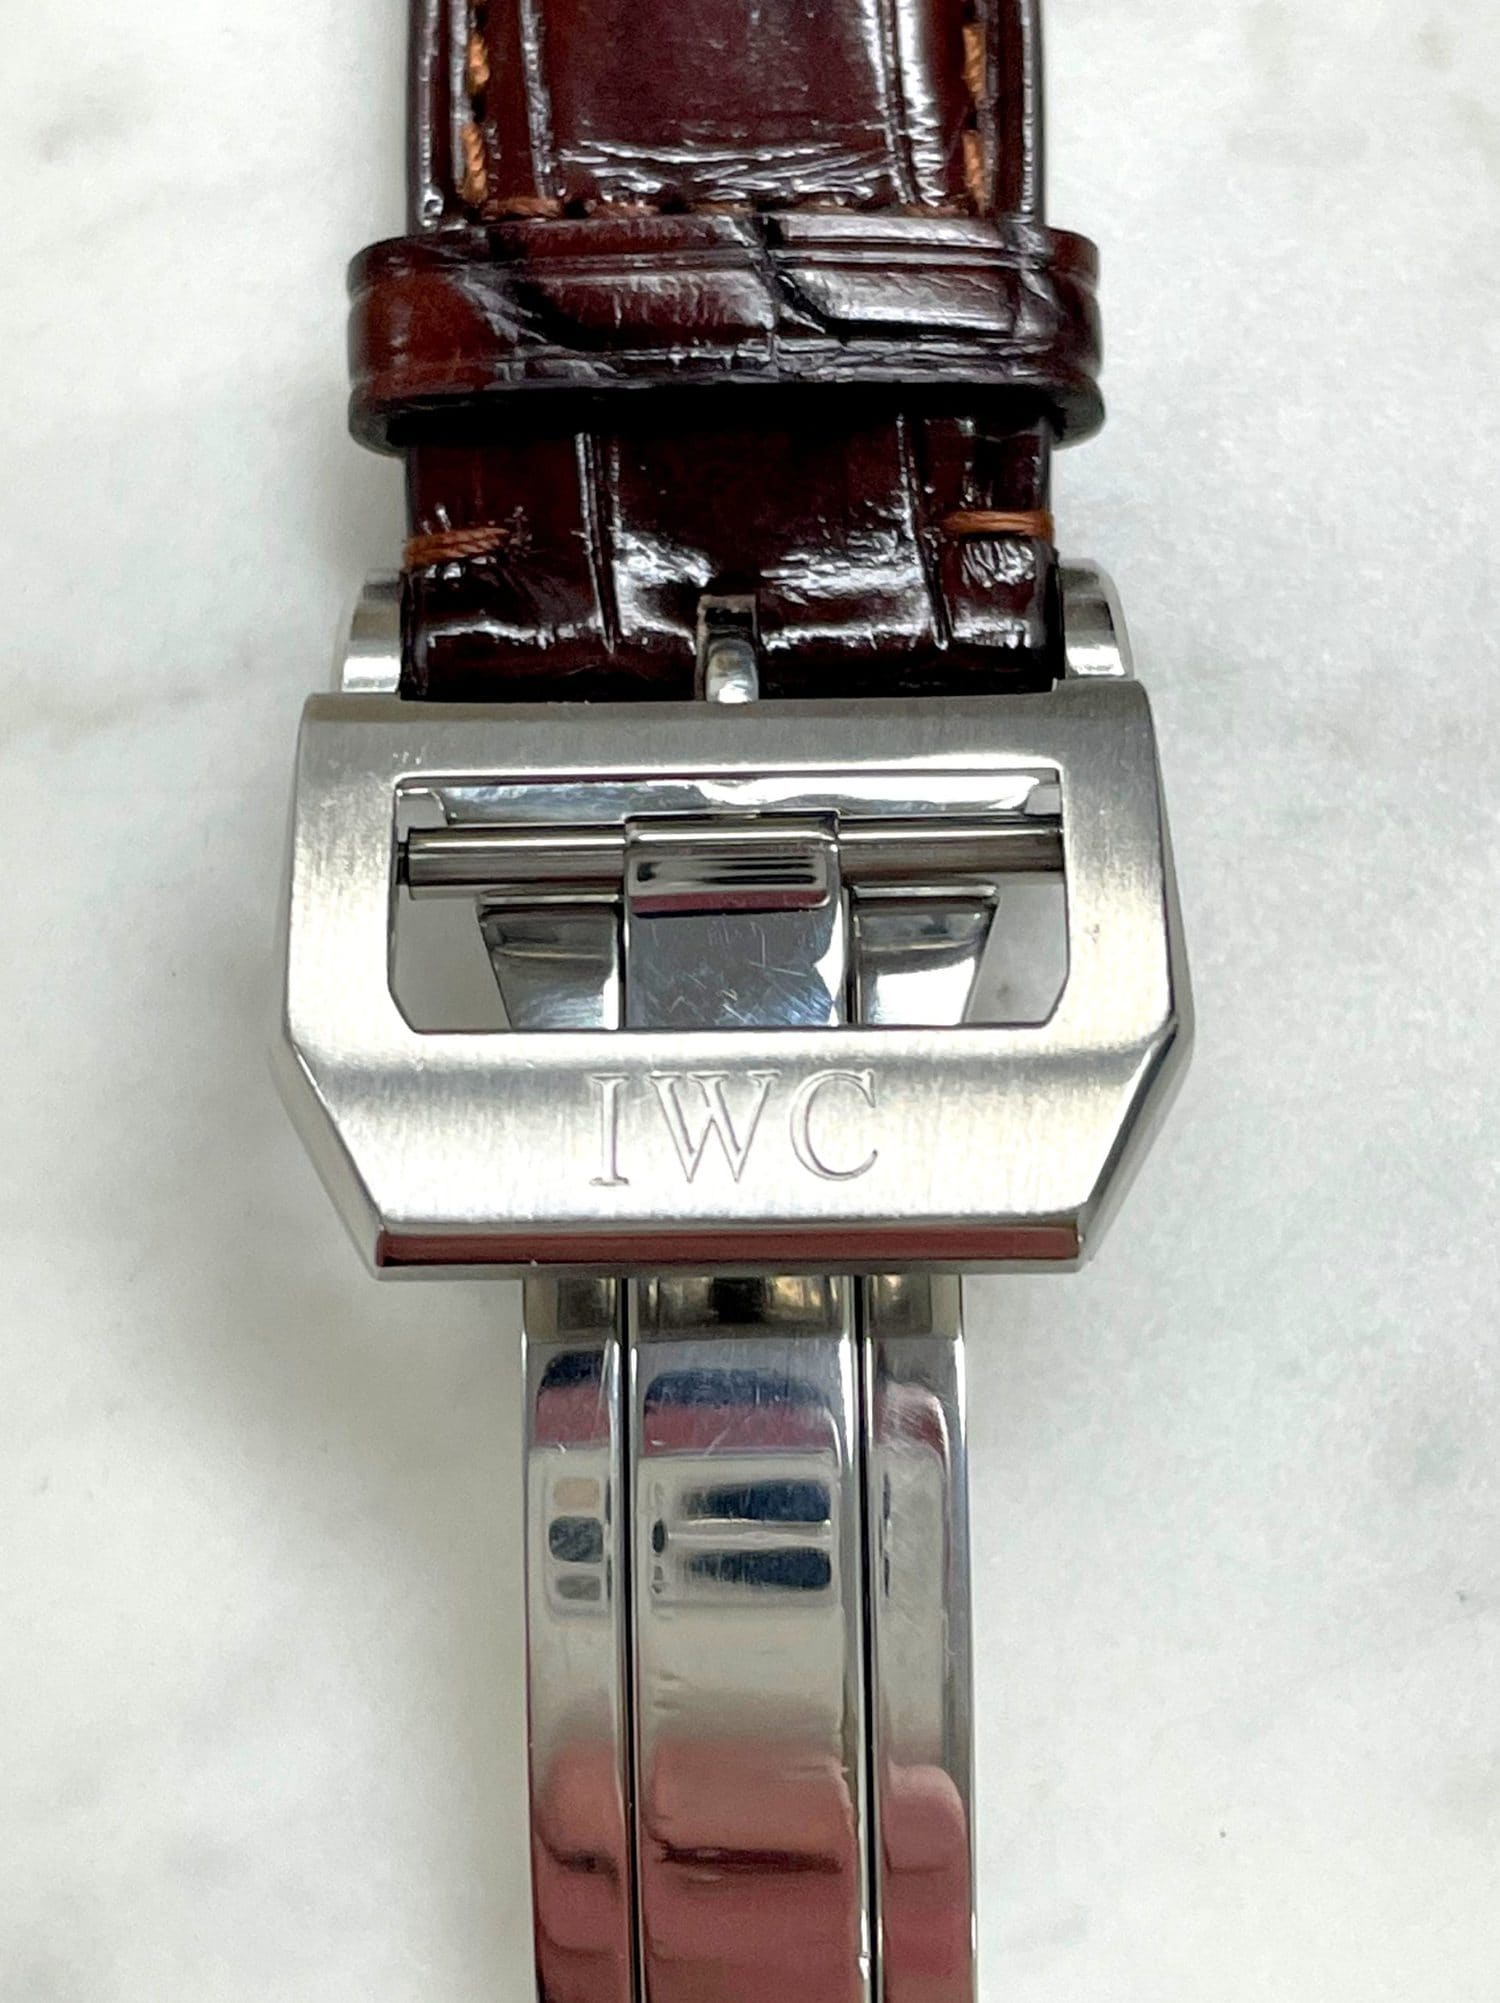 IWC - IW371450 - Portuguese Chronograph - Limited Edition 20/20 ...